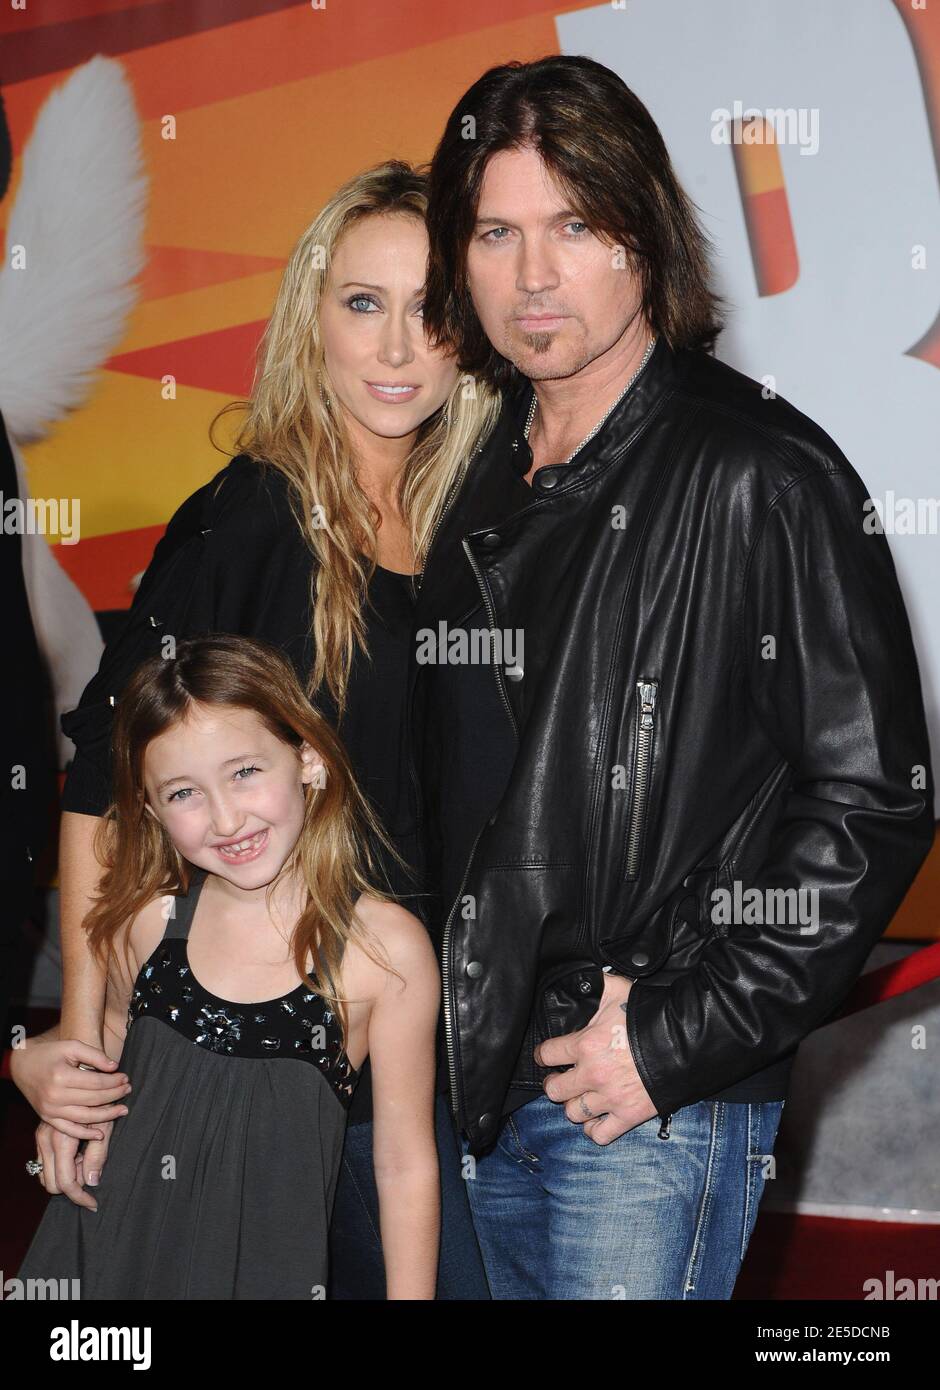 Billy Ray Cyrus and Tish Cyrus attend the World Premiere of Walt Disney's 'Bolt' held at El Capitan Theatre in Hollywood, Los Angeles, CA, USA on November 17, 2008. Photo by Lionel Hahn/ABACAPRESS.COM Stock Photo